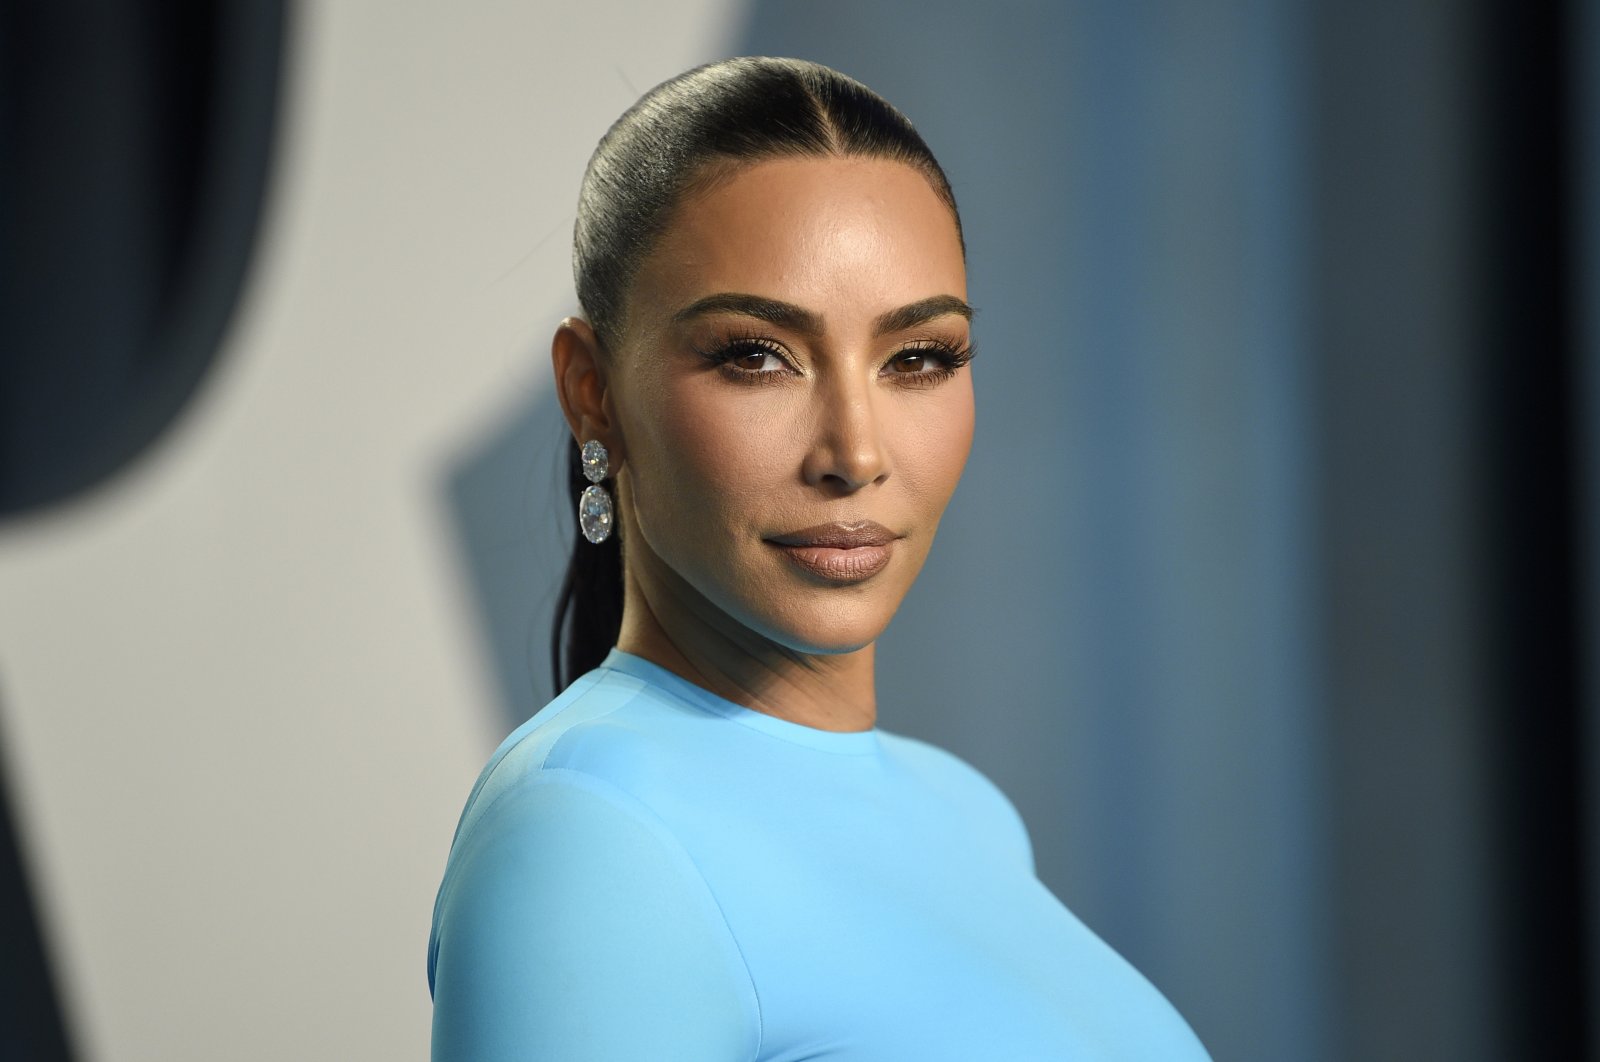 Kim Kardashian appears at the Vanity Fair Oscar Party in Beverly Hills, California, U.S.,  March 27, 2022. (Photo by Evan Agostini/Invision/AP, File)